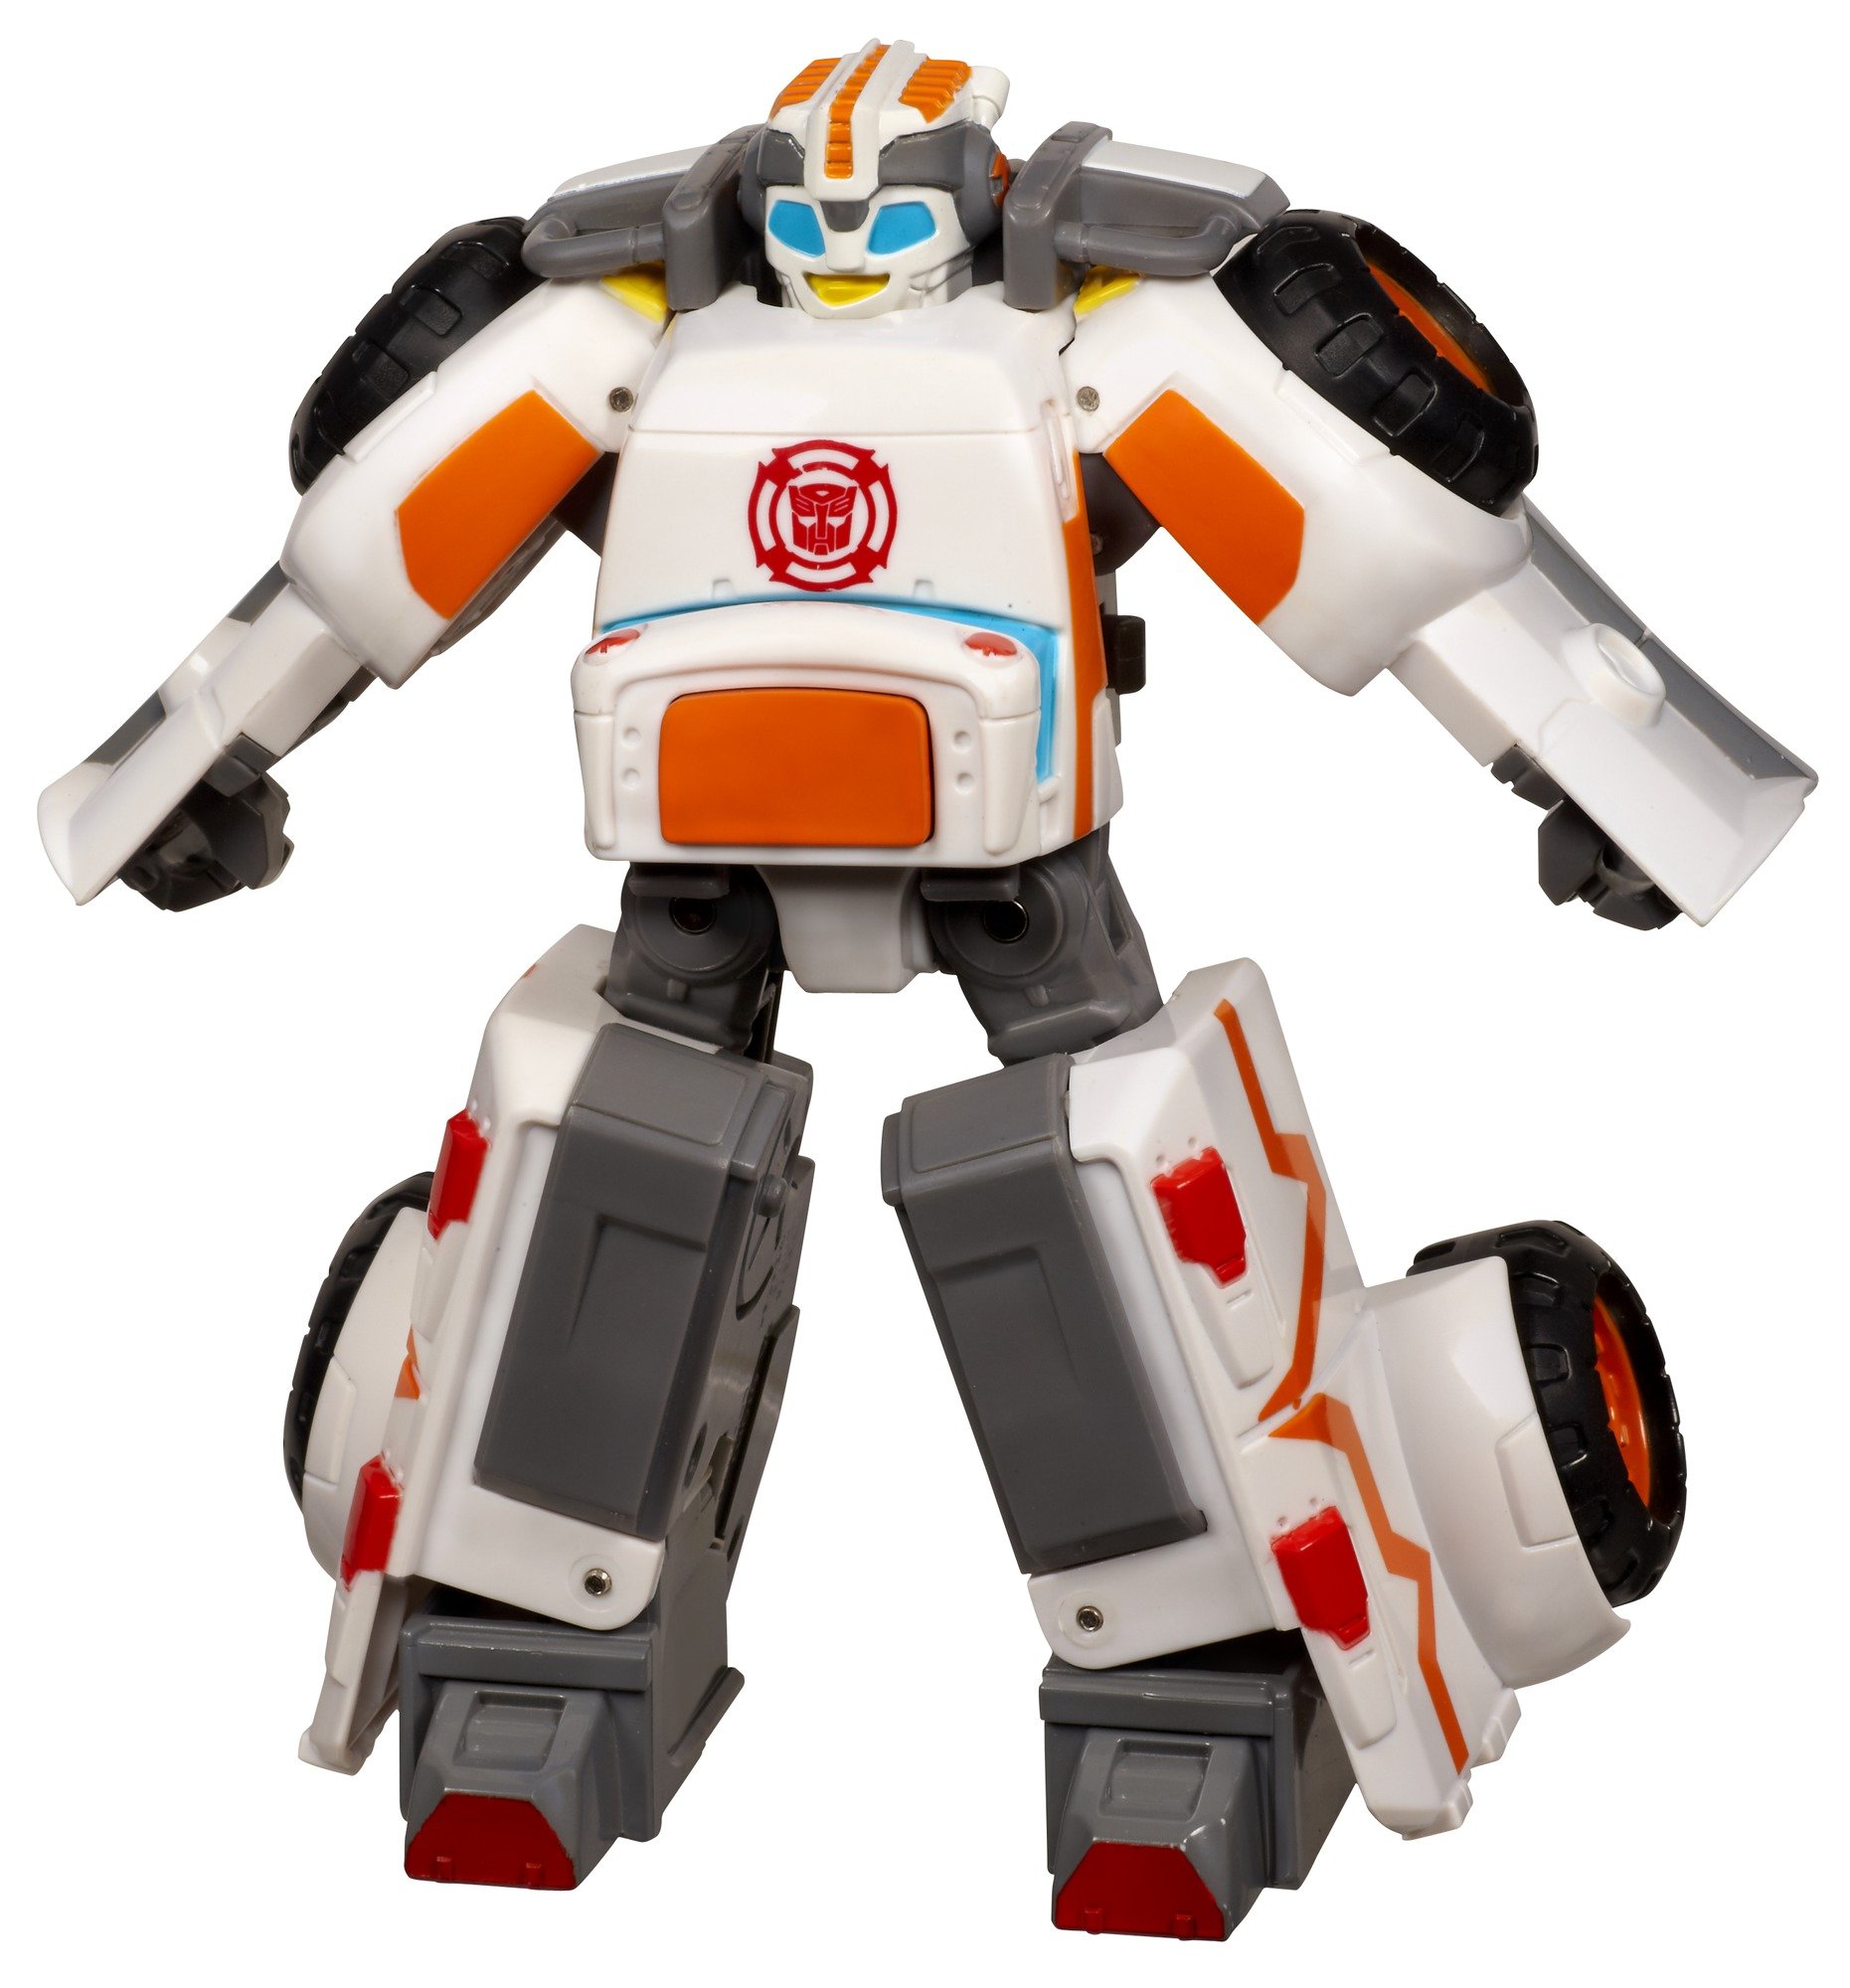 Hasbro Playskool Heroes Transformers Rescue Bots Medix The Doc-Bot, Action Figure, Ages 3-7 (Amazon Exclusive)